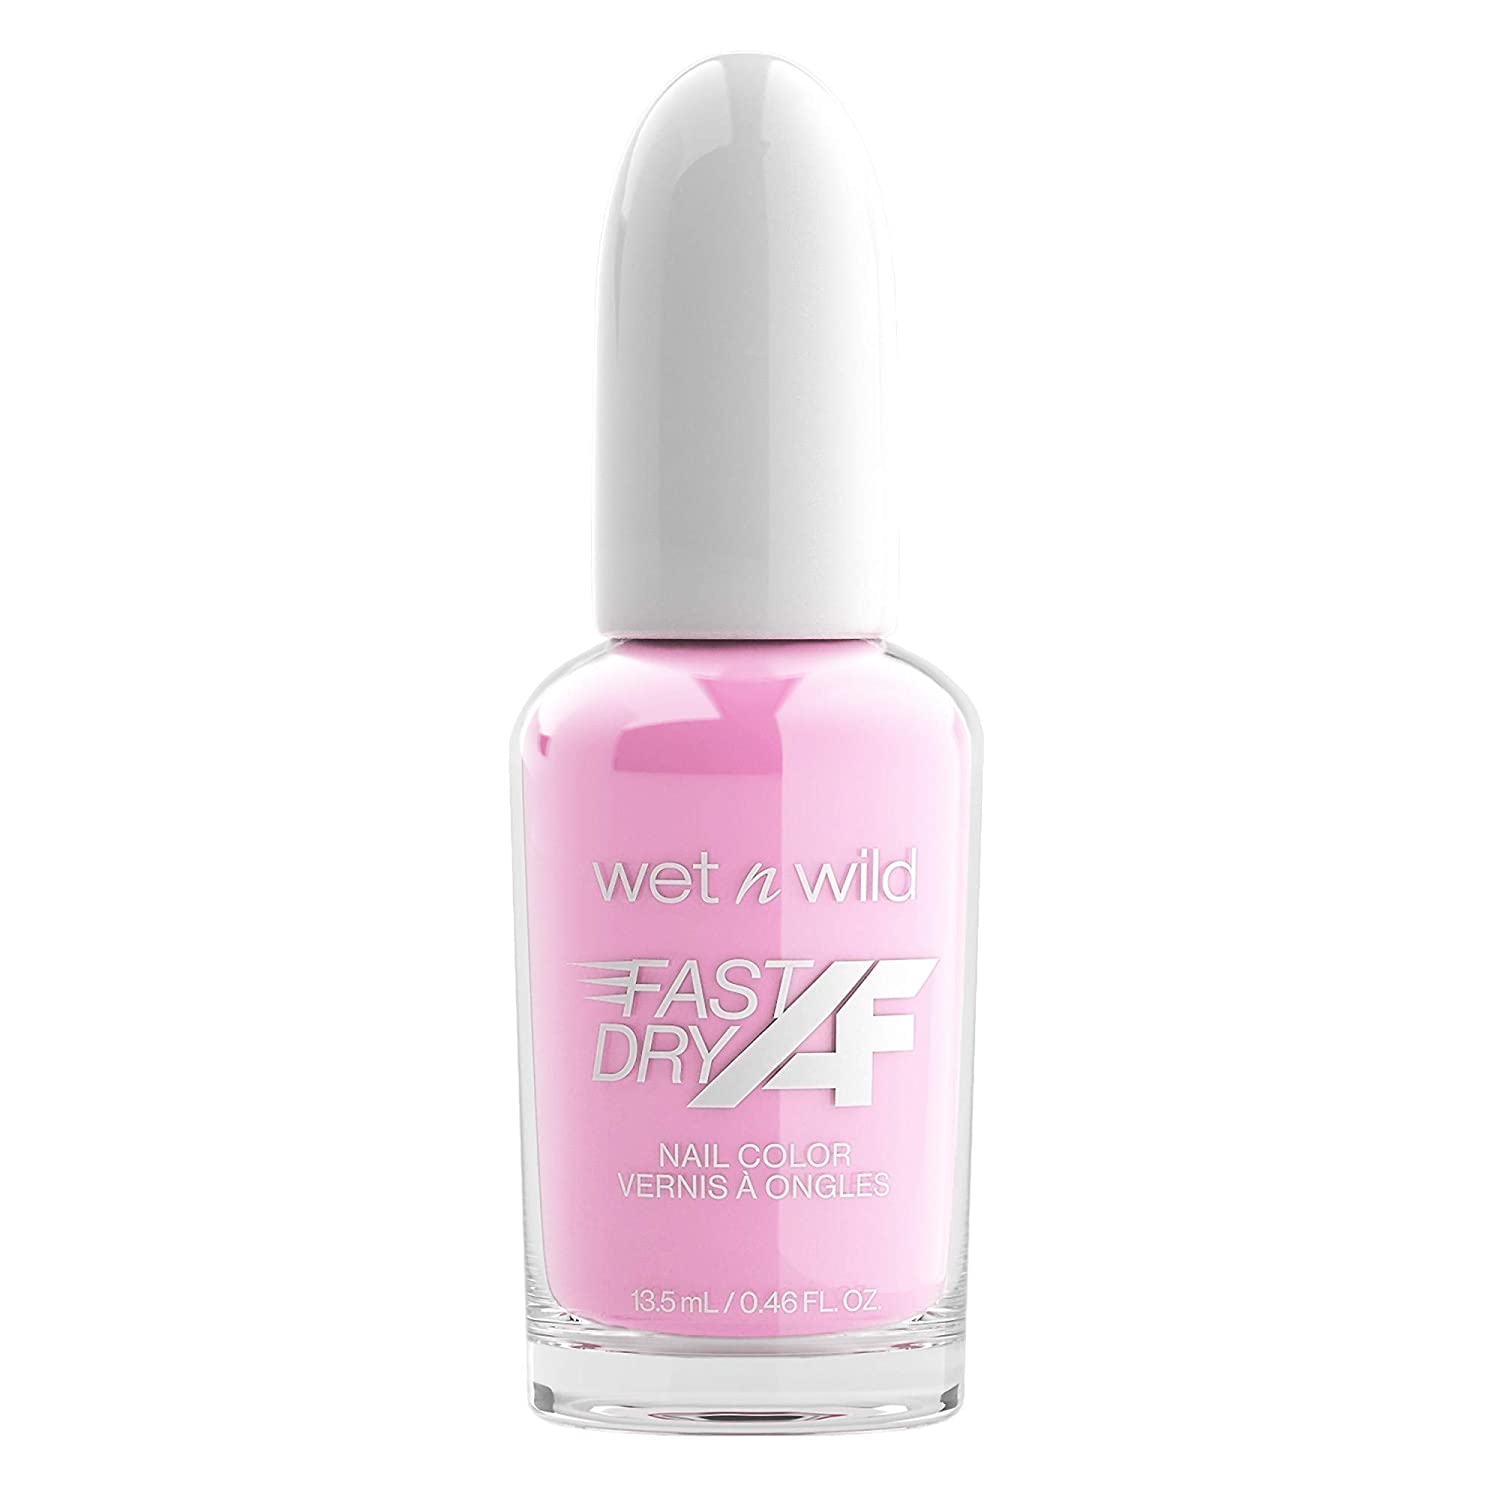 Wet n Wild Fast Dry AF Nail Color Light Pink Cotton Candy